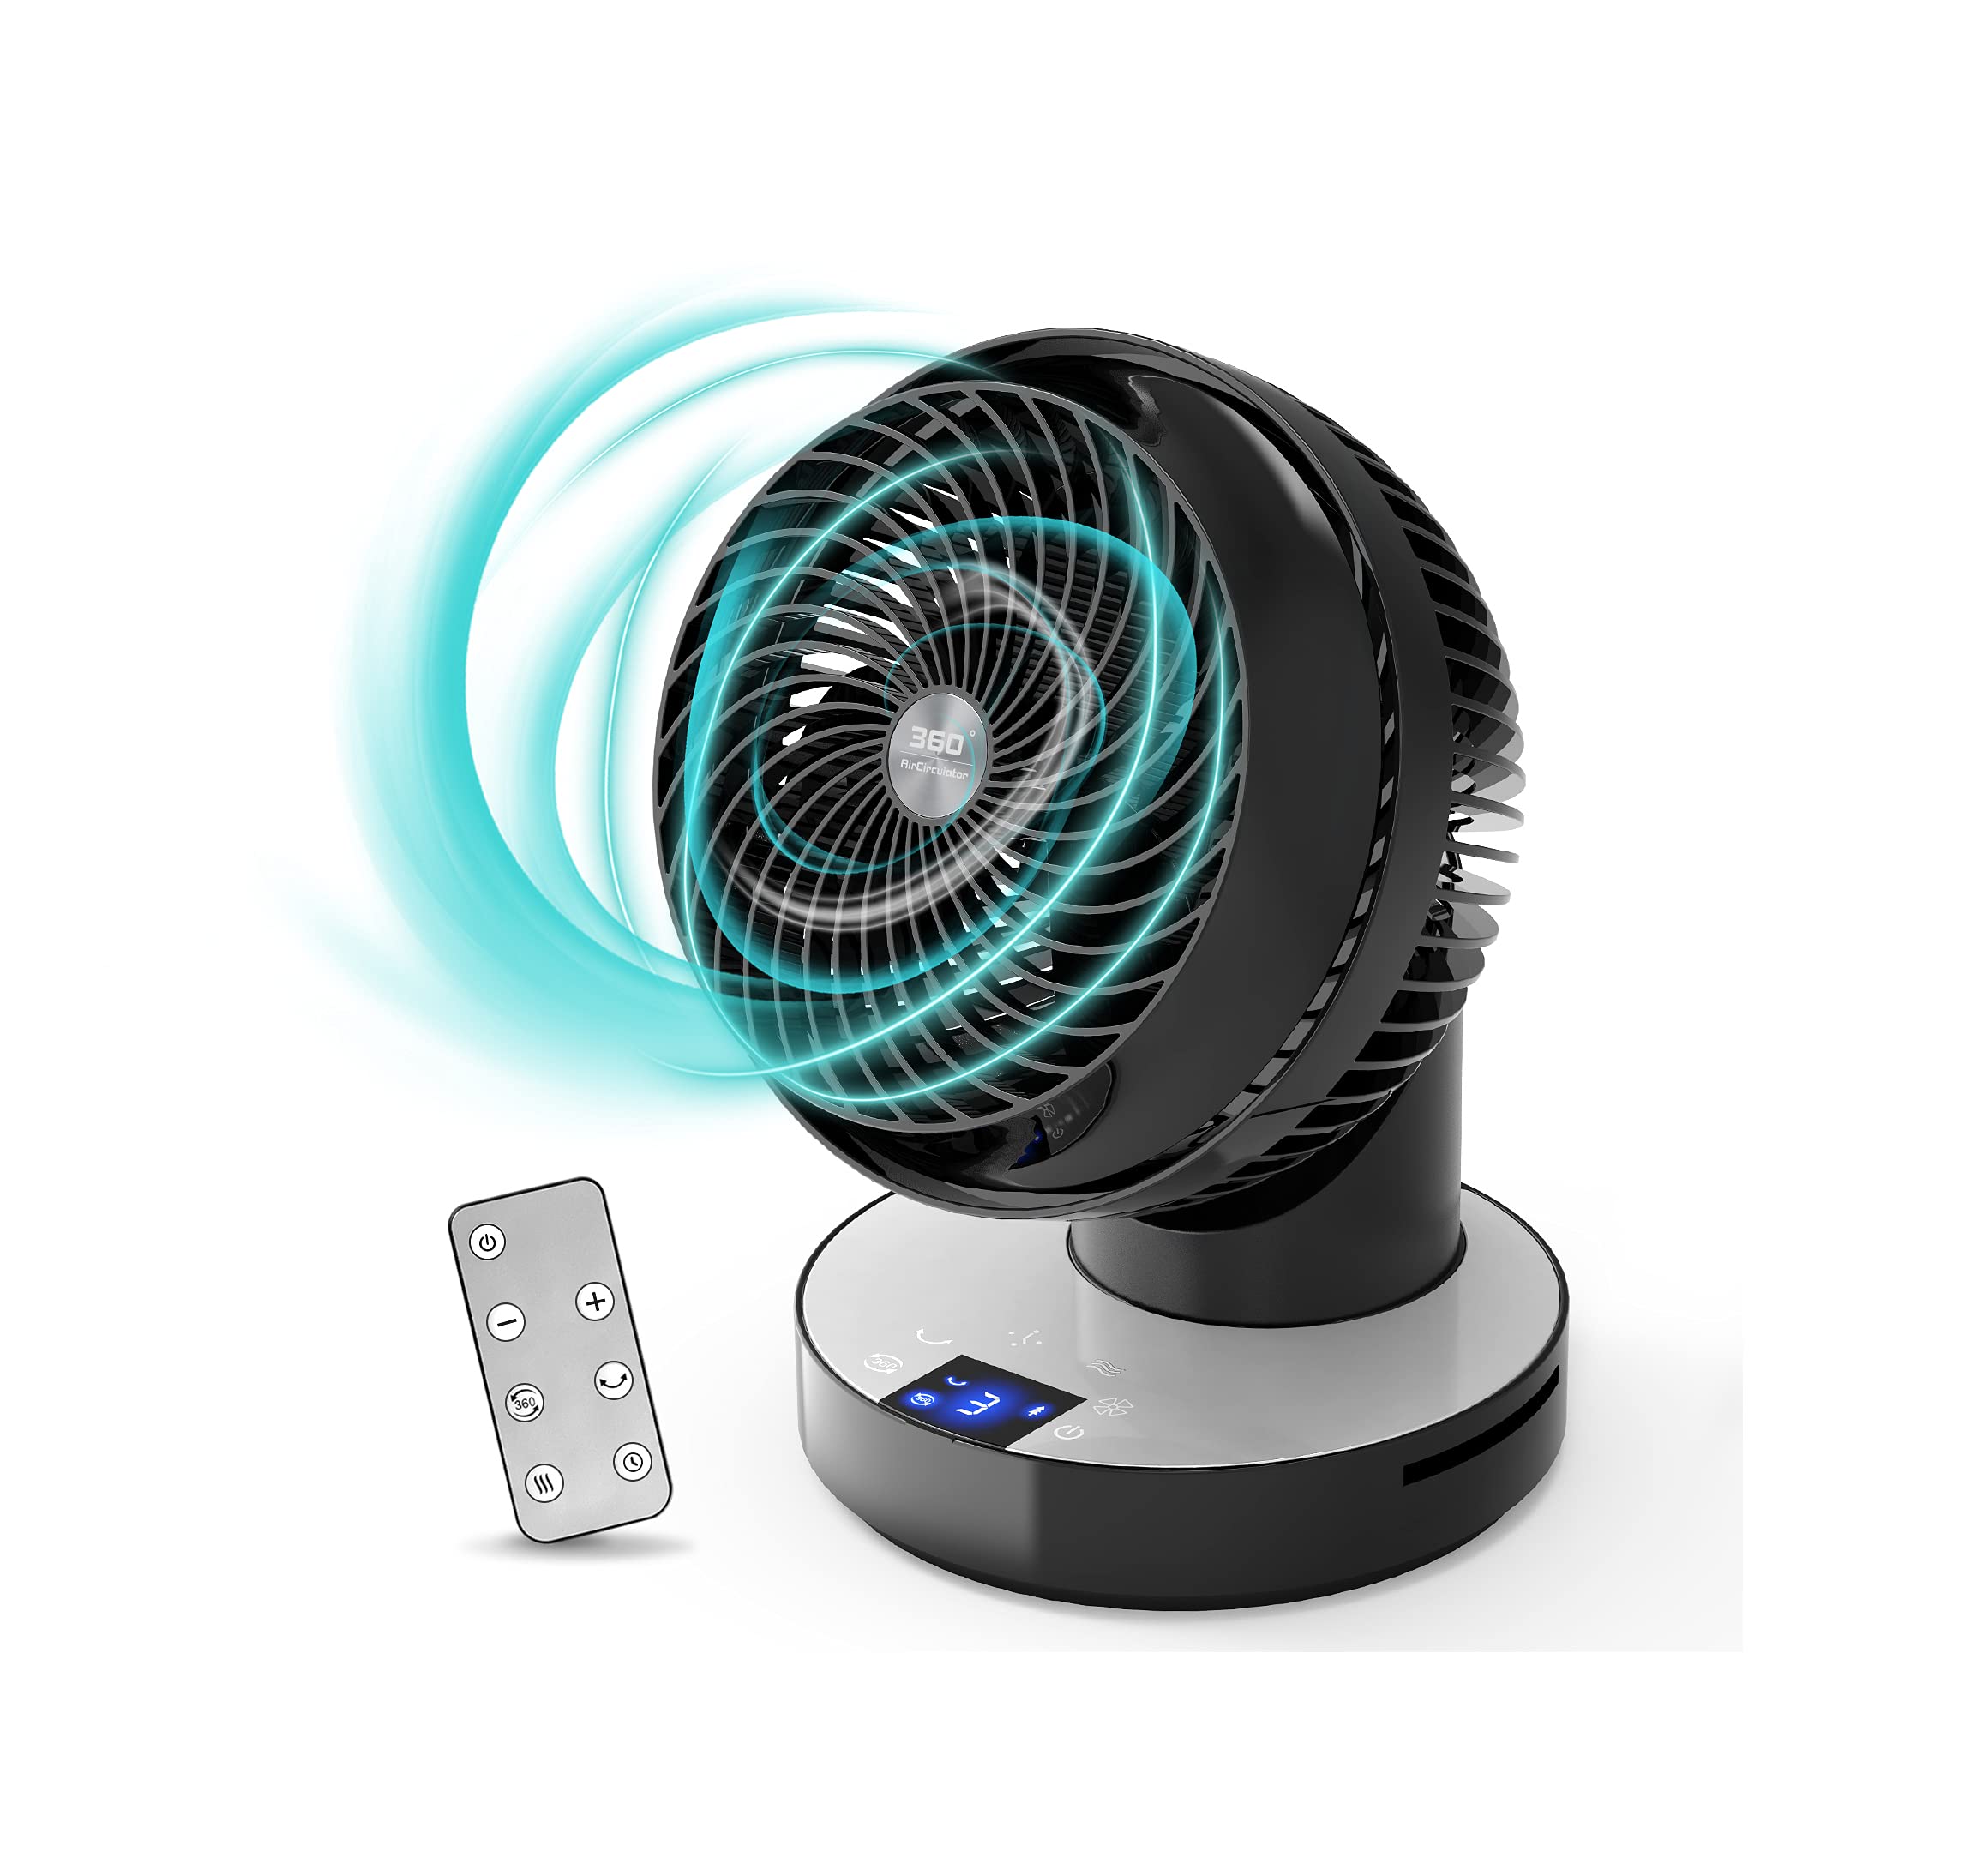 IKK Air Circulator Fan, Full 360 Degree Oscillating Fan with Remote control, Touch LED Screen, 4 Speeds 3 Wind Modes, Wide Angle Air Blowing, Perso...